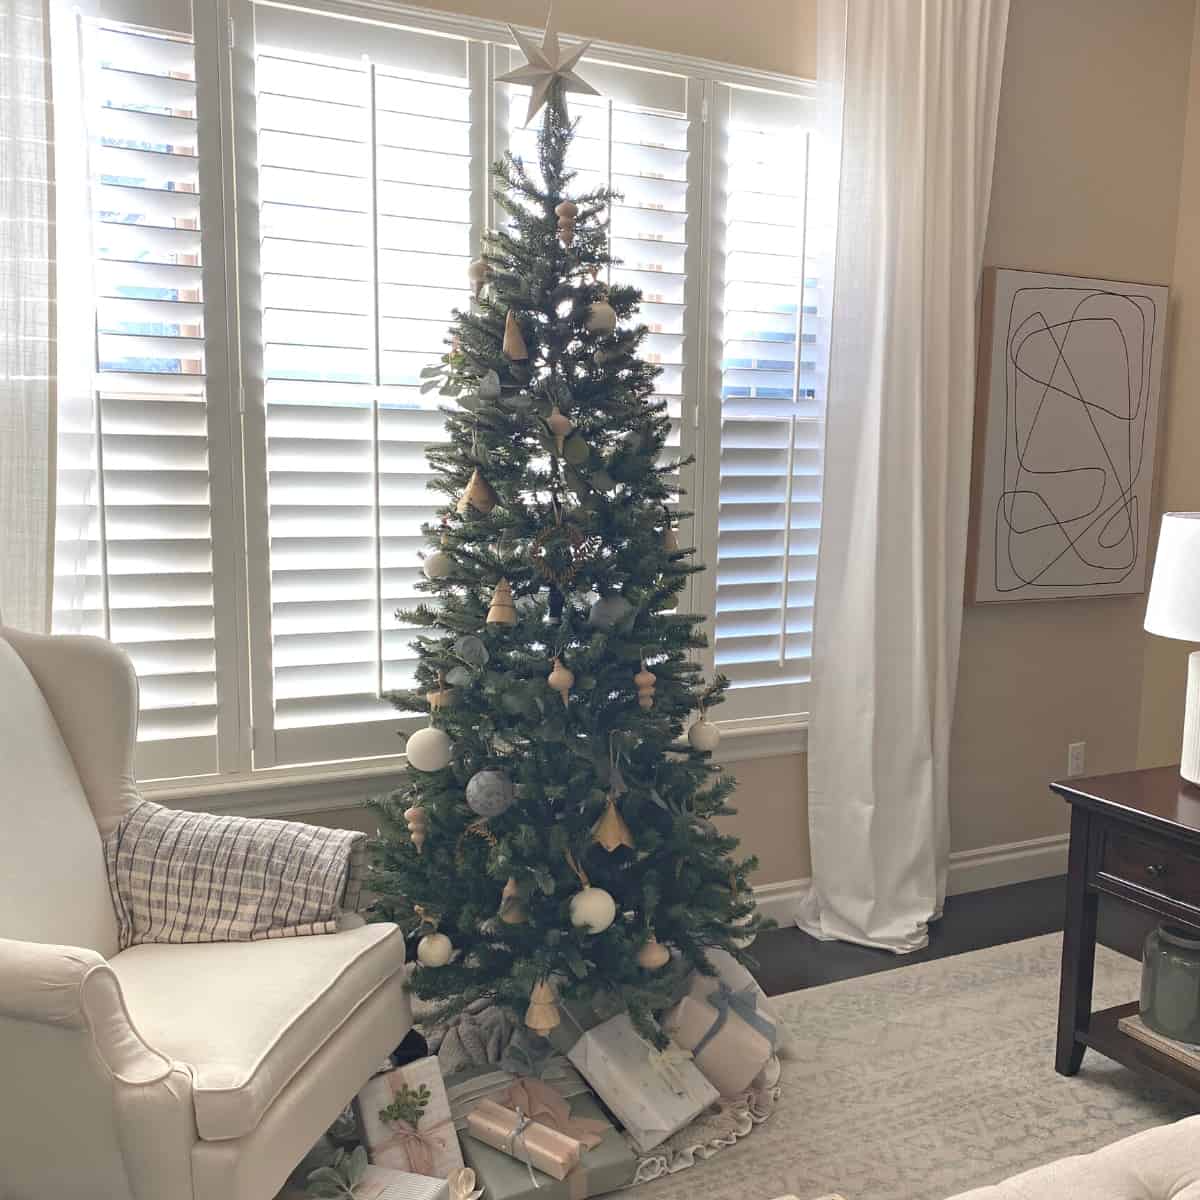 Neutral decorated Christmas tree in a living room with presents beneath